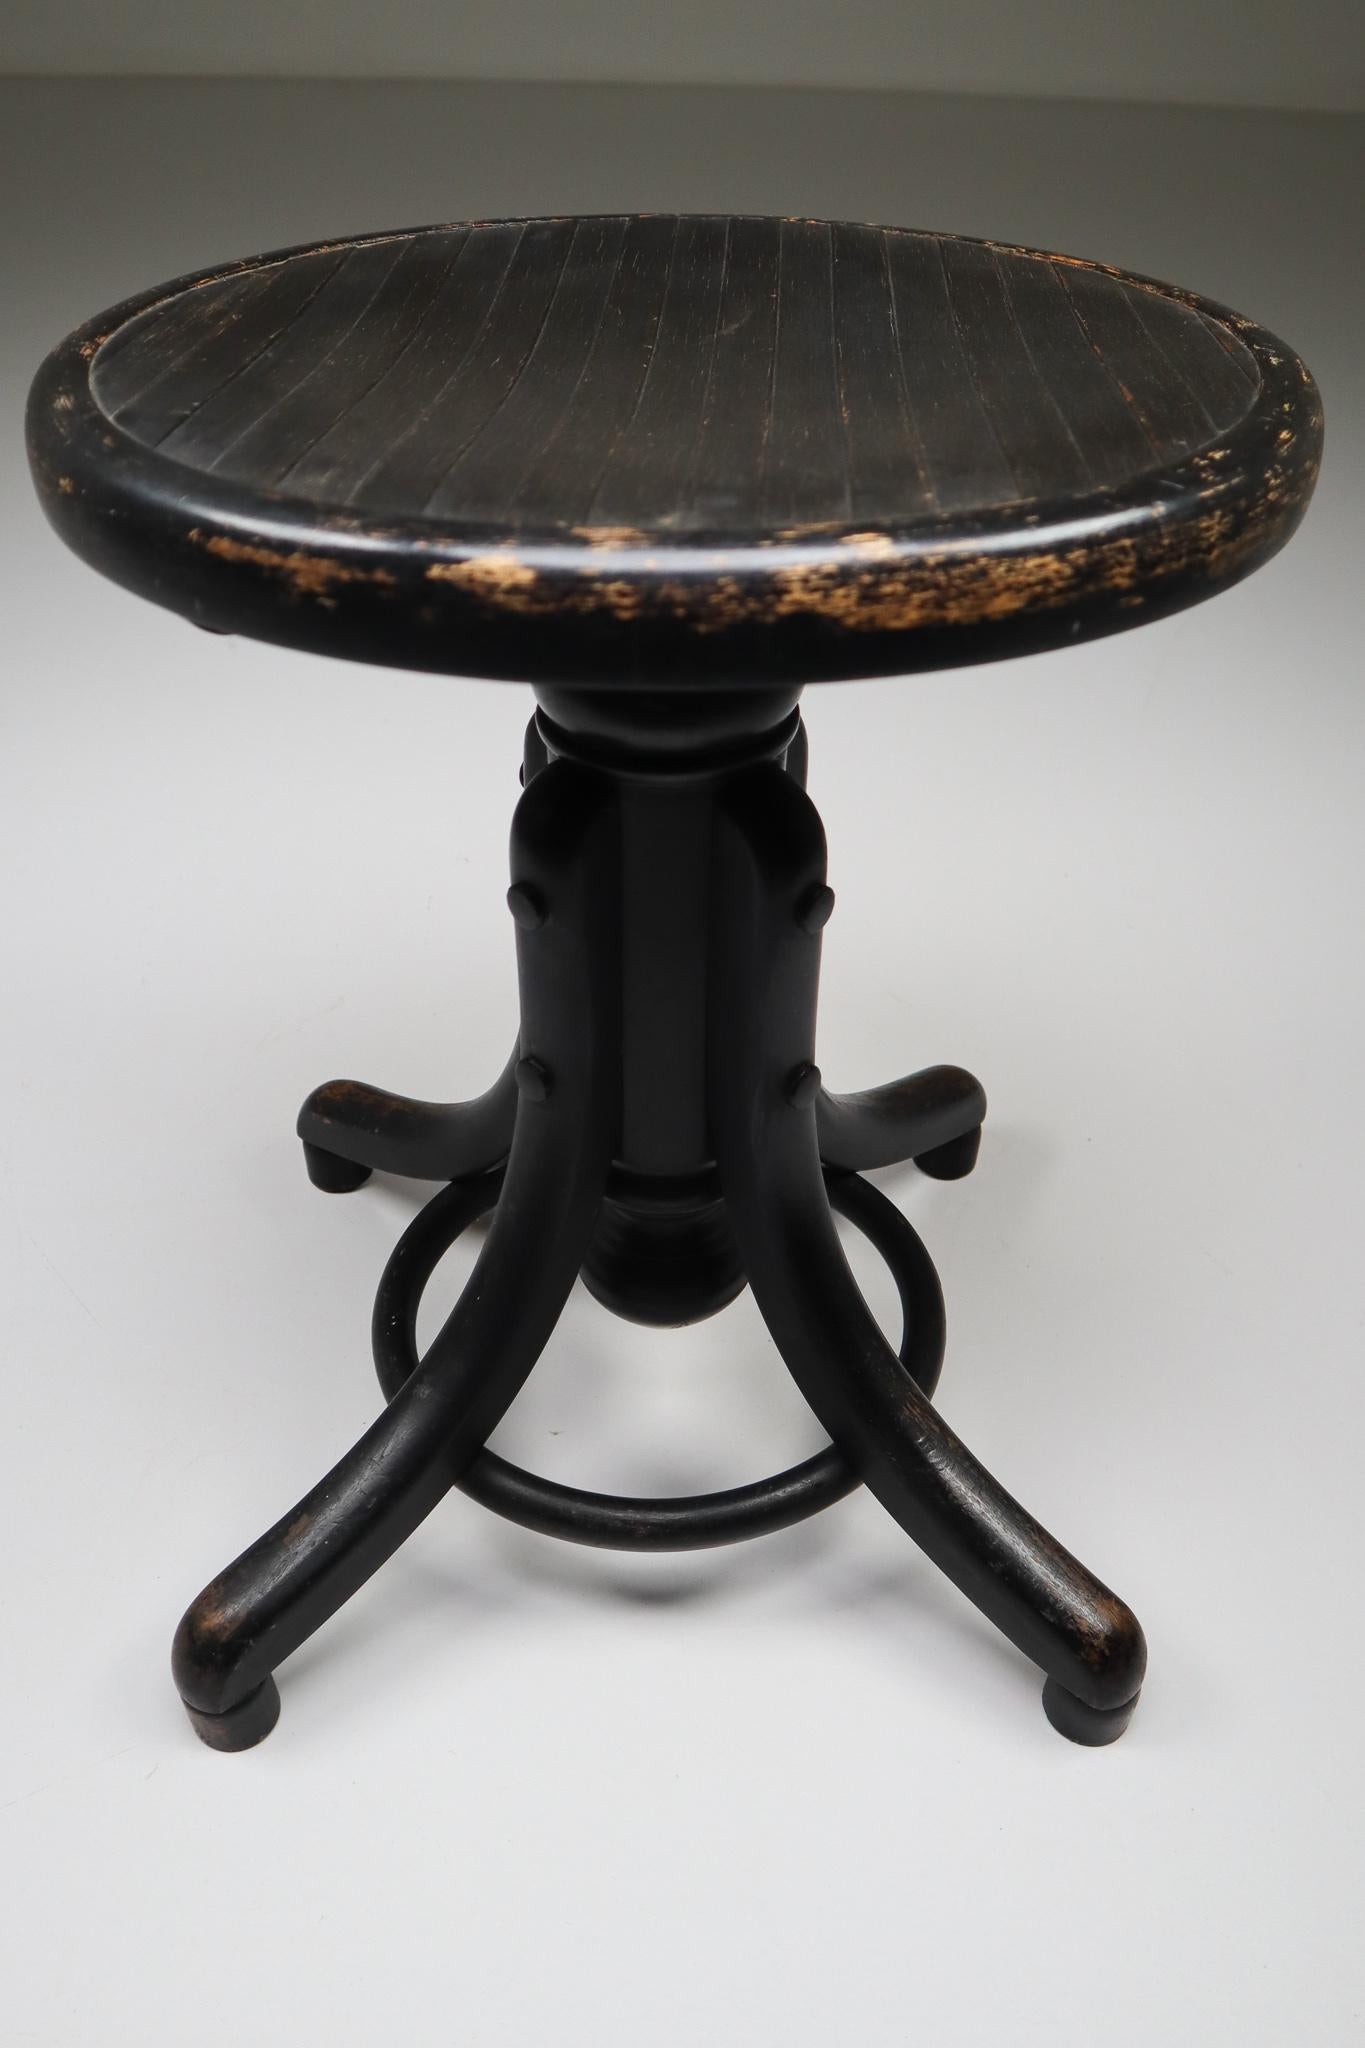 Vienna Secession Black Patinated Bentwood Piano Stool by Thonet, Austria, 1900s